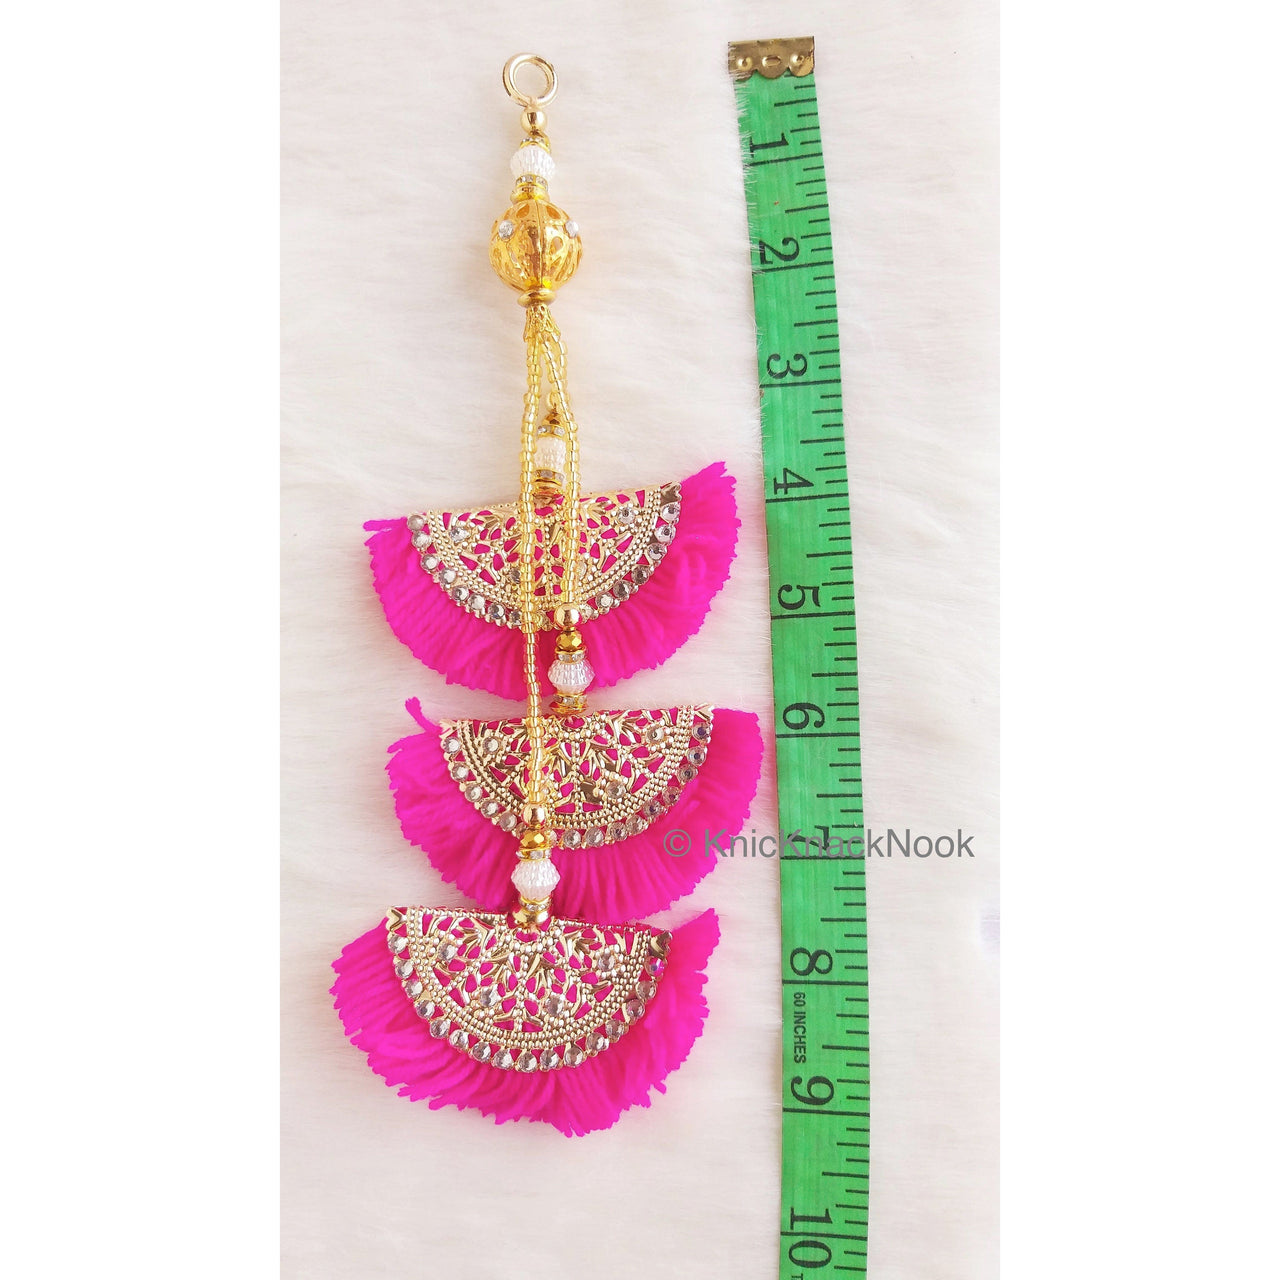 Blue / Pink Fan Tassels With Silver and Gold Filigree Embellishments, Wool Tassels, Embellishments